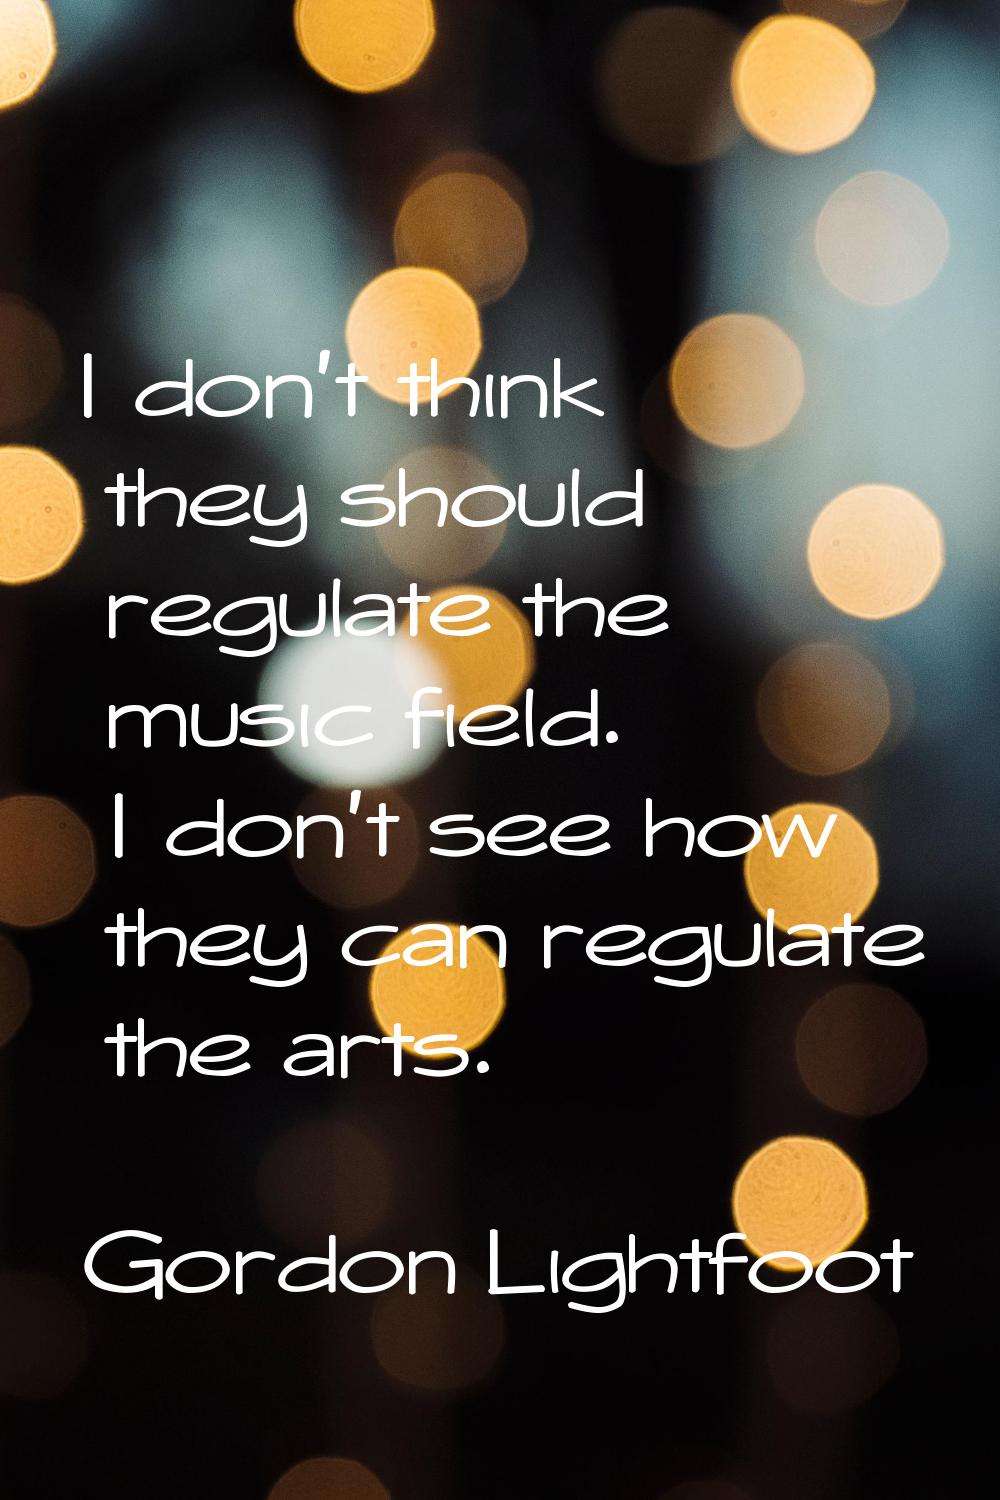 I don't think they should regulate the music field. I don't see how they can regulate the arts.